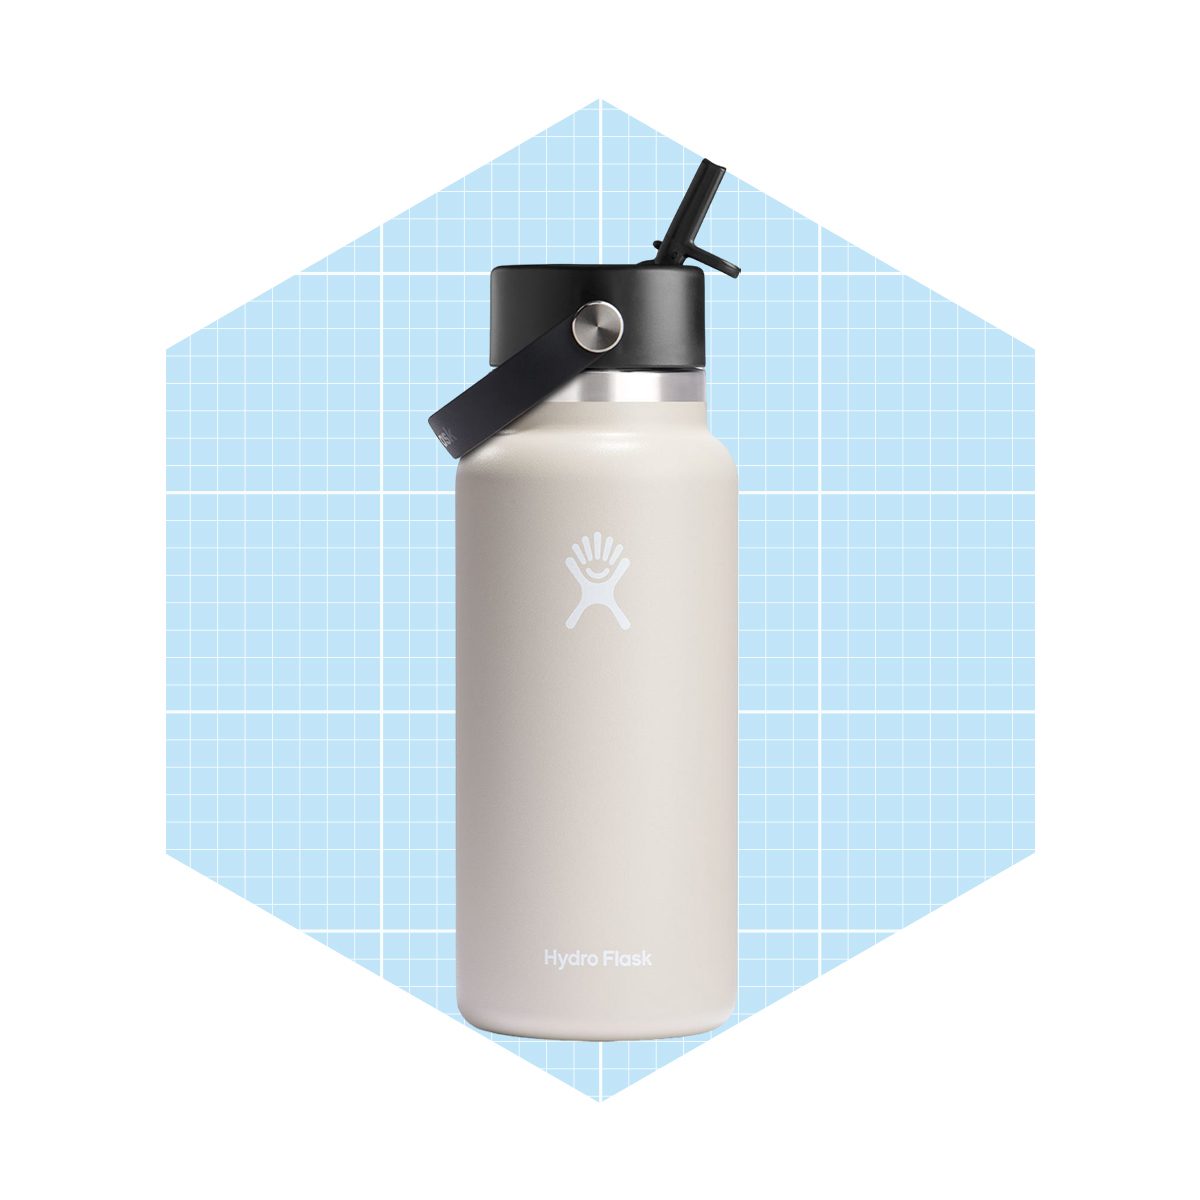 <p>Staying hydrated when locked in a car for hours on end is important. This <a href="https://www.hydroflask.com/32-oz-wide-mouth-with-flex-straw-cap" rel="noopener noreferrer">insulated wide-mouth bottle from Hydro Flask</a> holds up to 32 fluid ounces (one quart). Most importantly, the <a href="https://www.familyhandyman.com/article/how-to-clean-stainless-steel/">stainless steel</a> flask with double-wall vacuum insulation keeps cold drinks cold for up to 24 hours or hot beverages warm for 12 hours. Keep one hand on the wheel and another on the signature flex straw cap.</p> <p class="listicle-page__cta-button-shop"><a class="shop-btn" href="https://www.hydroflask.com/32-oz-wide-mouth-with-flex-straw-cap">Shop Now</a></p>